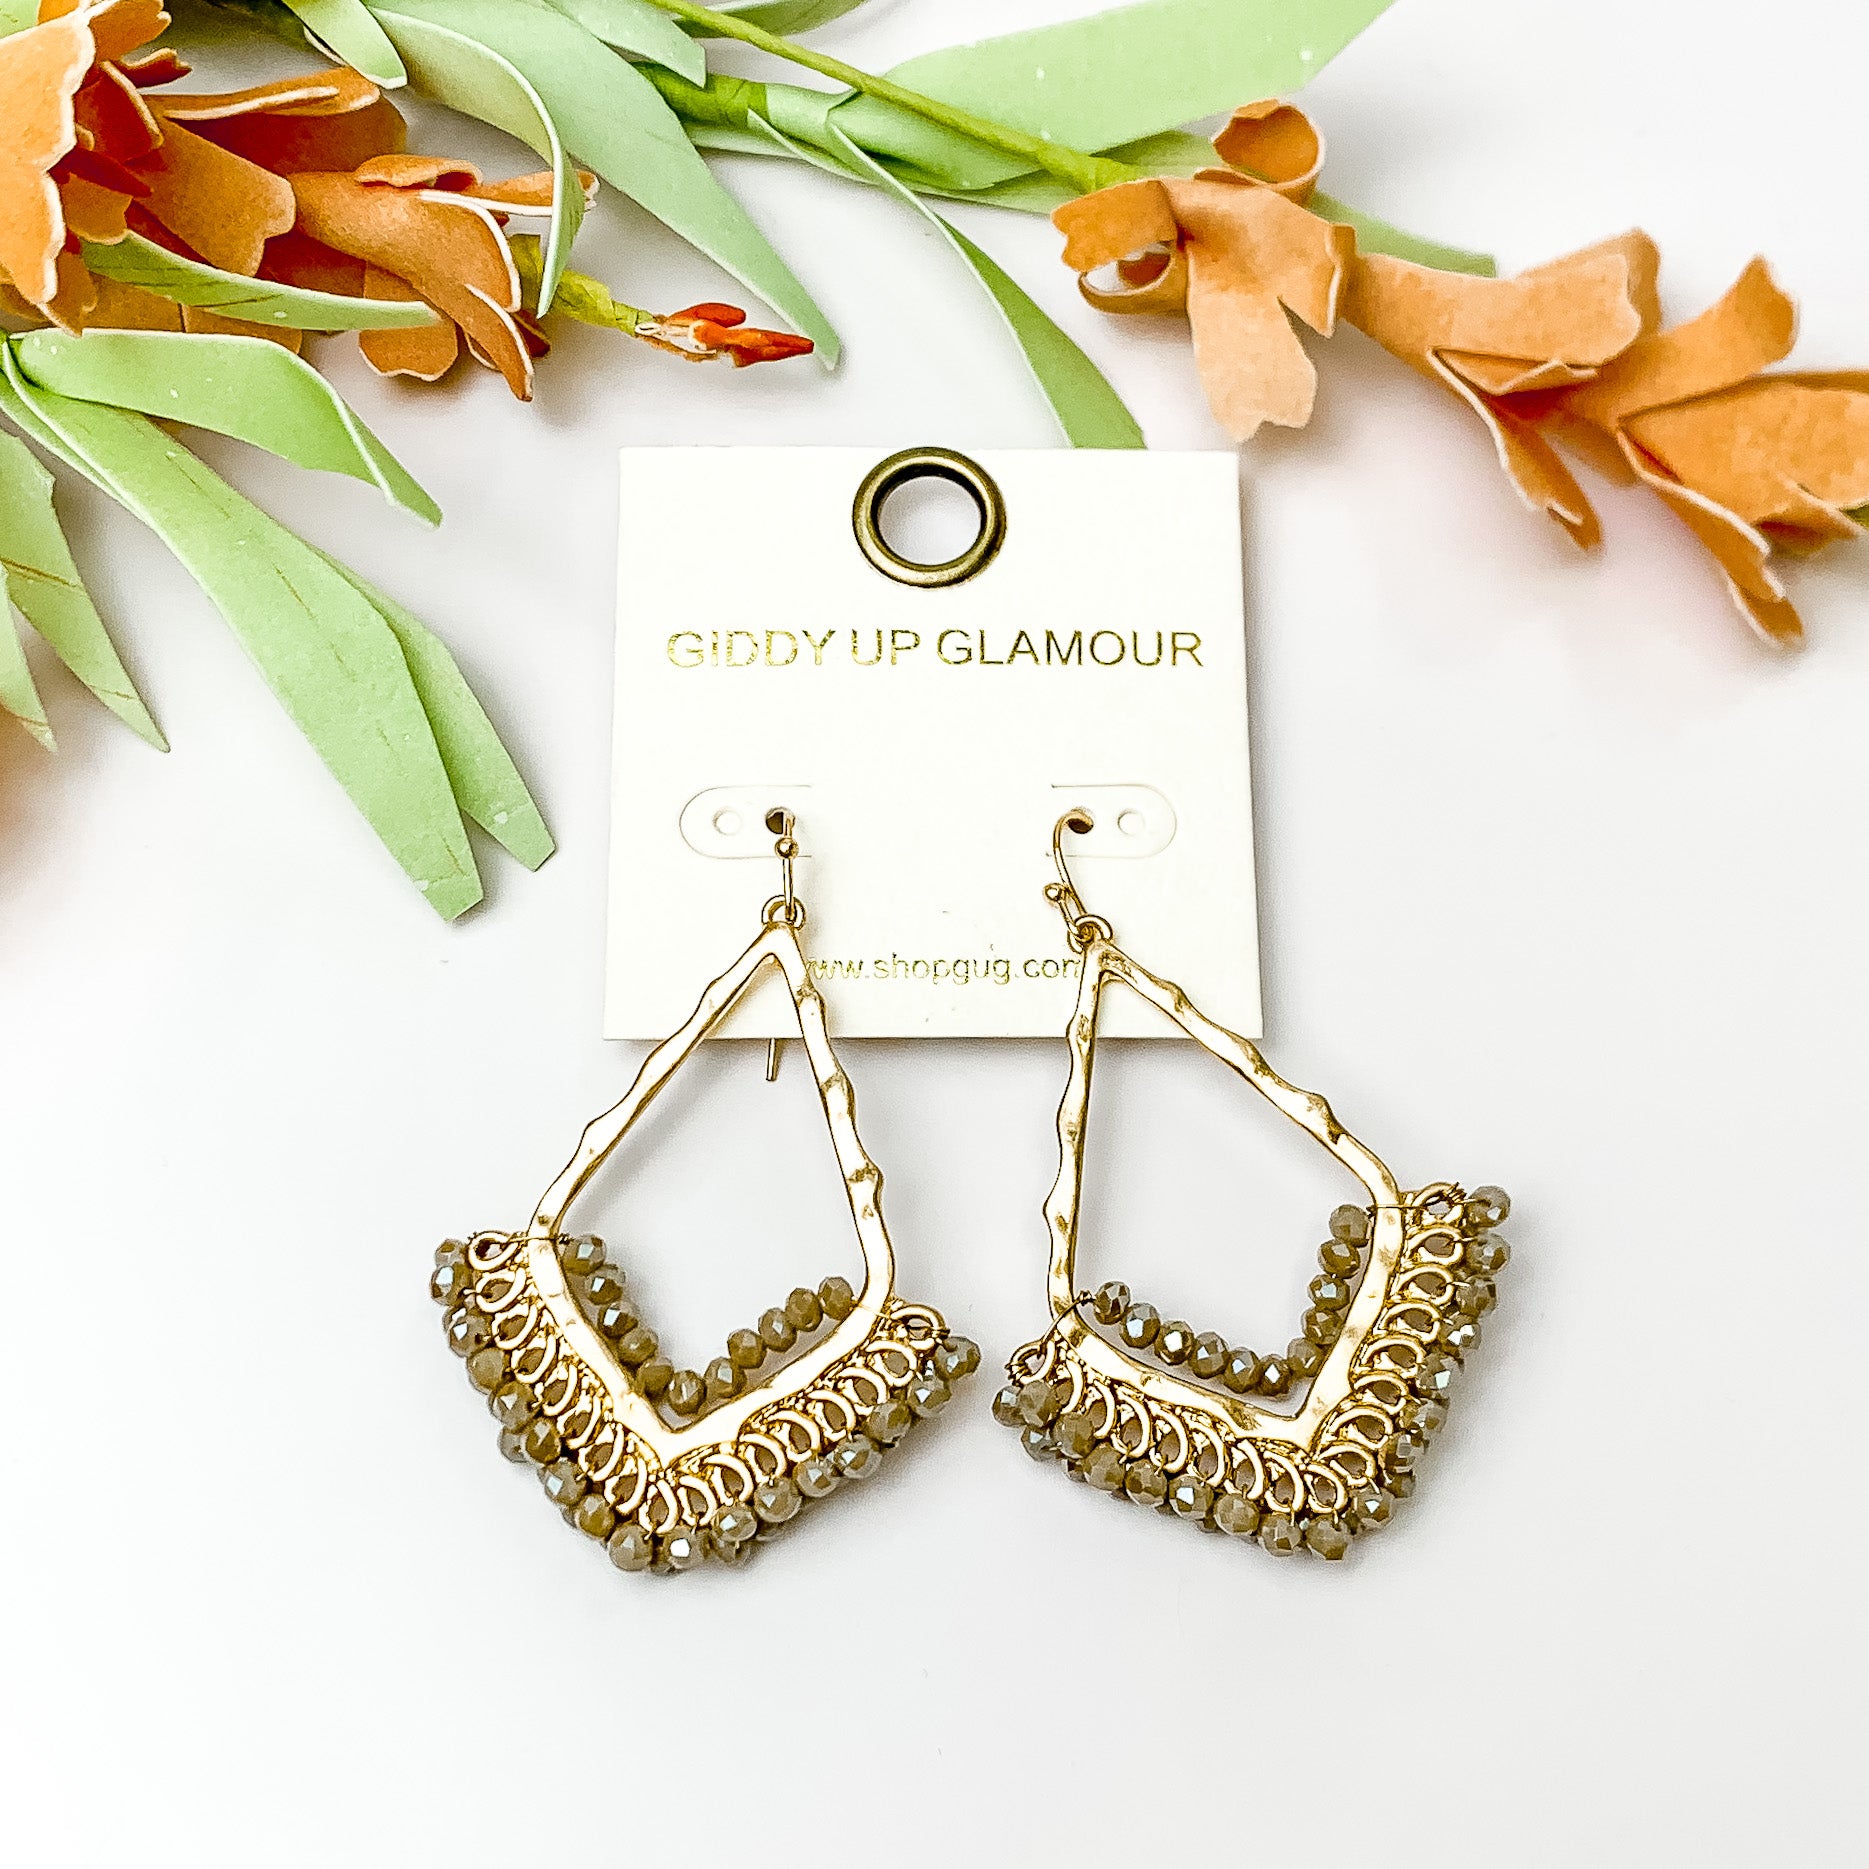 Beige crystal beads bordering open drop gold tone earrings. Pictured on a white background with flowers at the top.